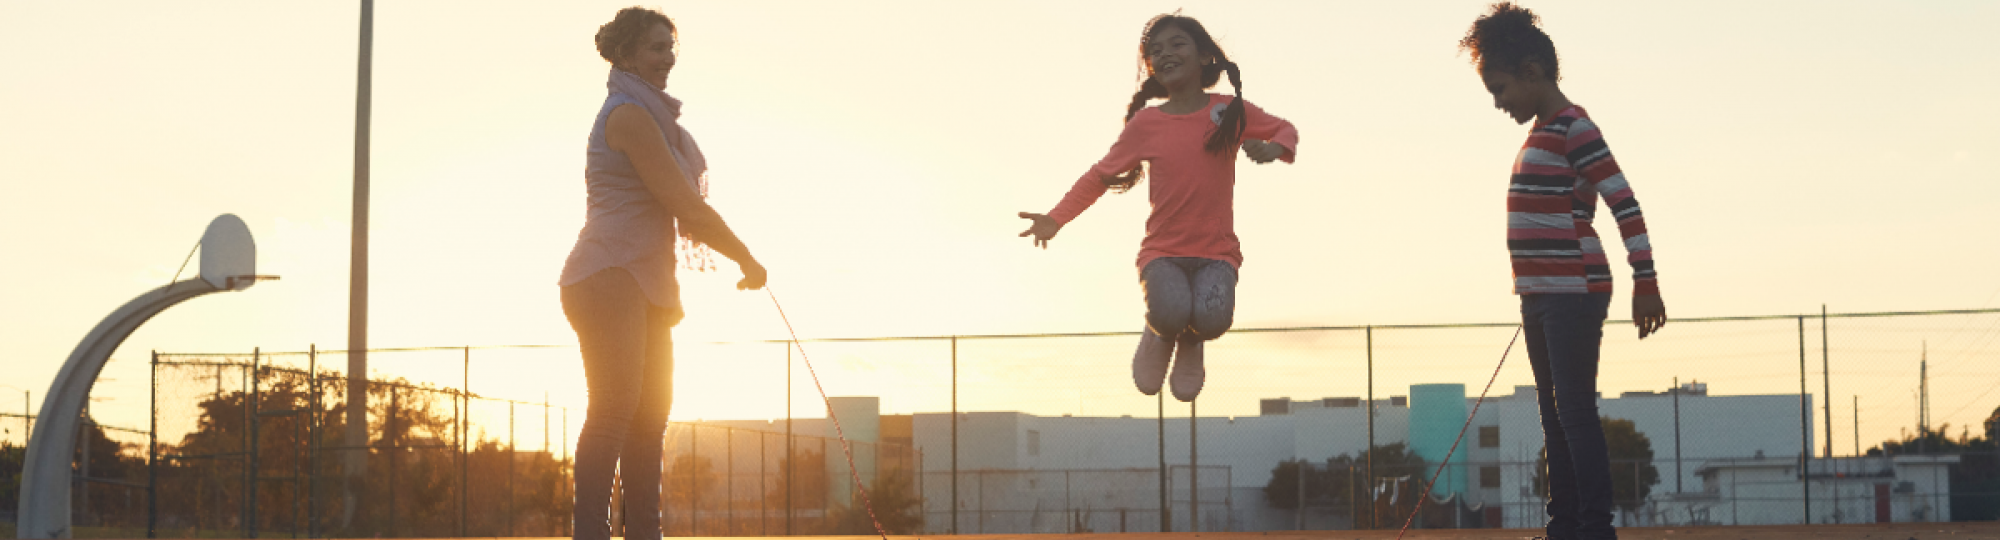 Two girls and their mom play jump rope on an outdoor basketball court as the sun sets behind them.